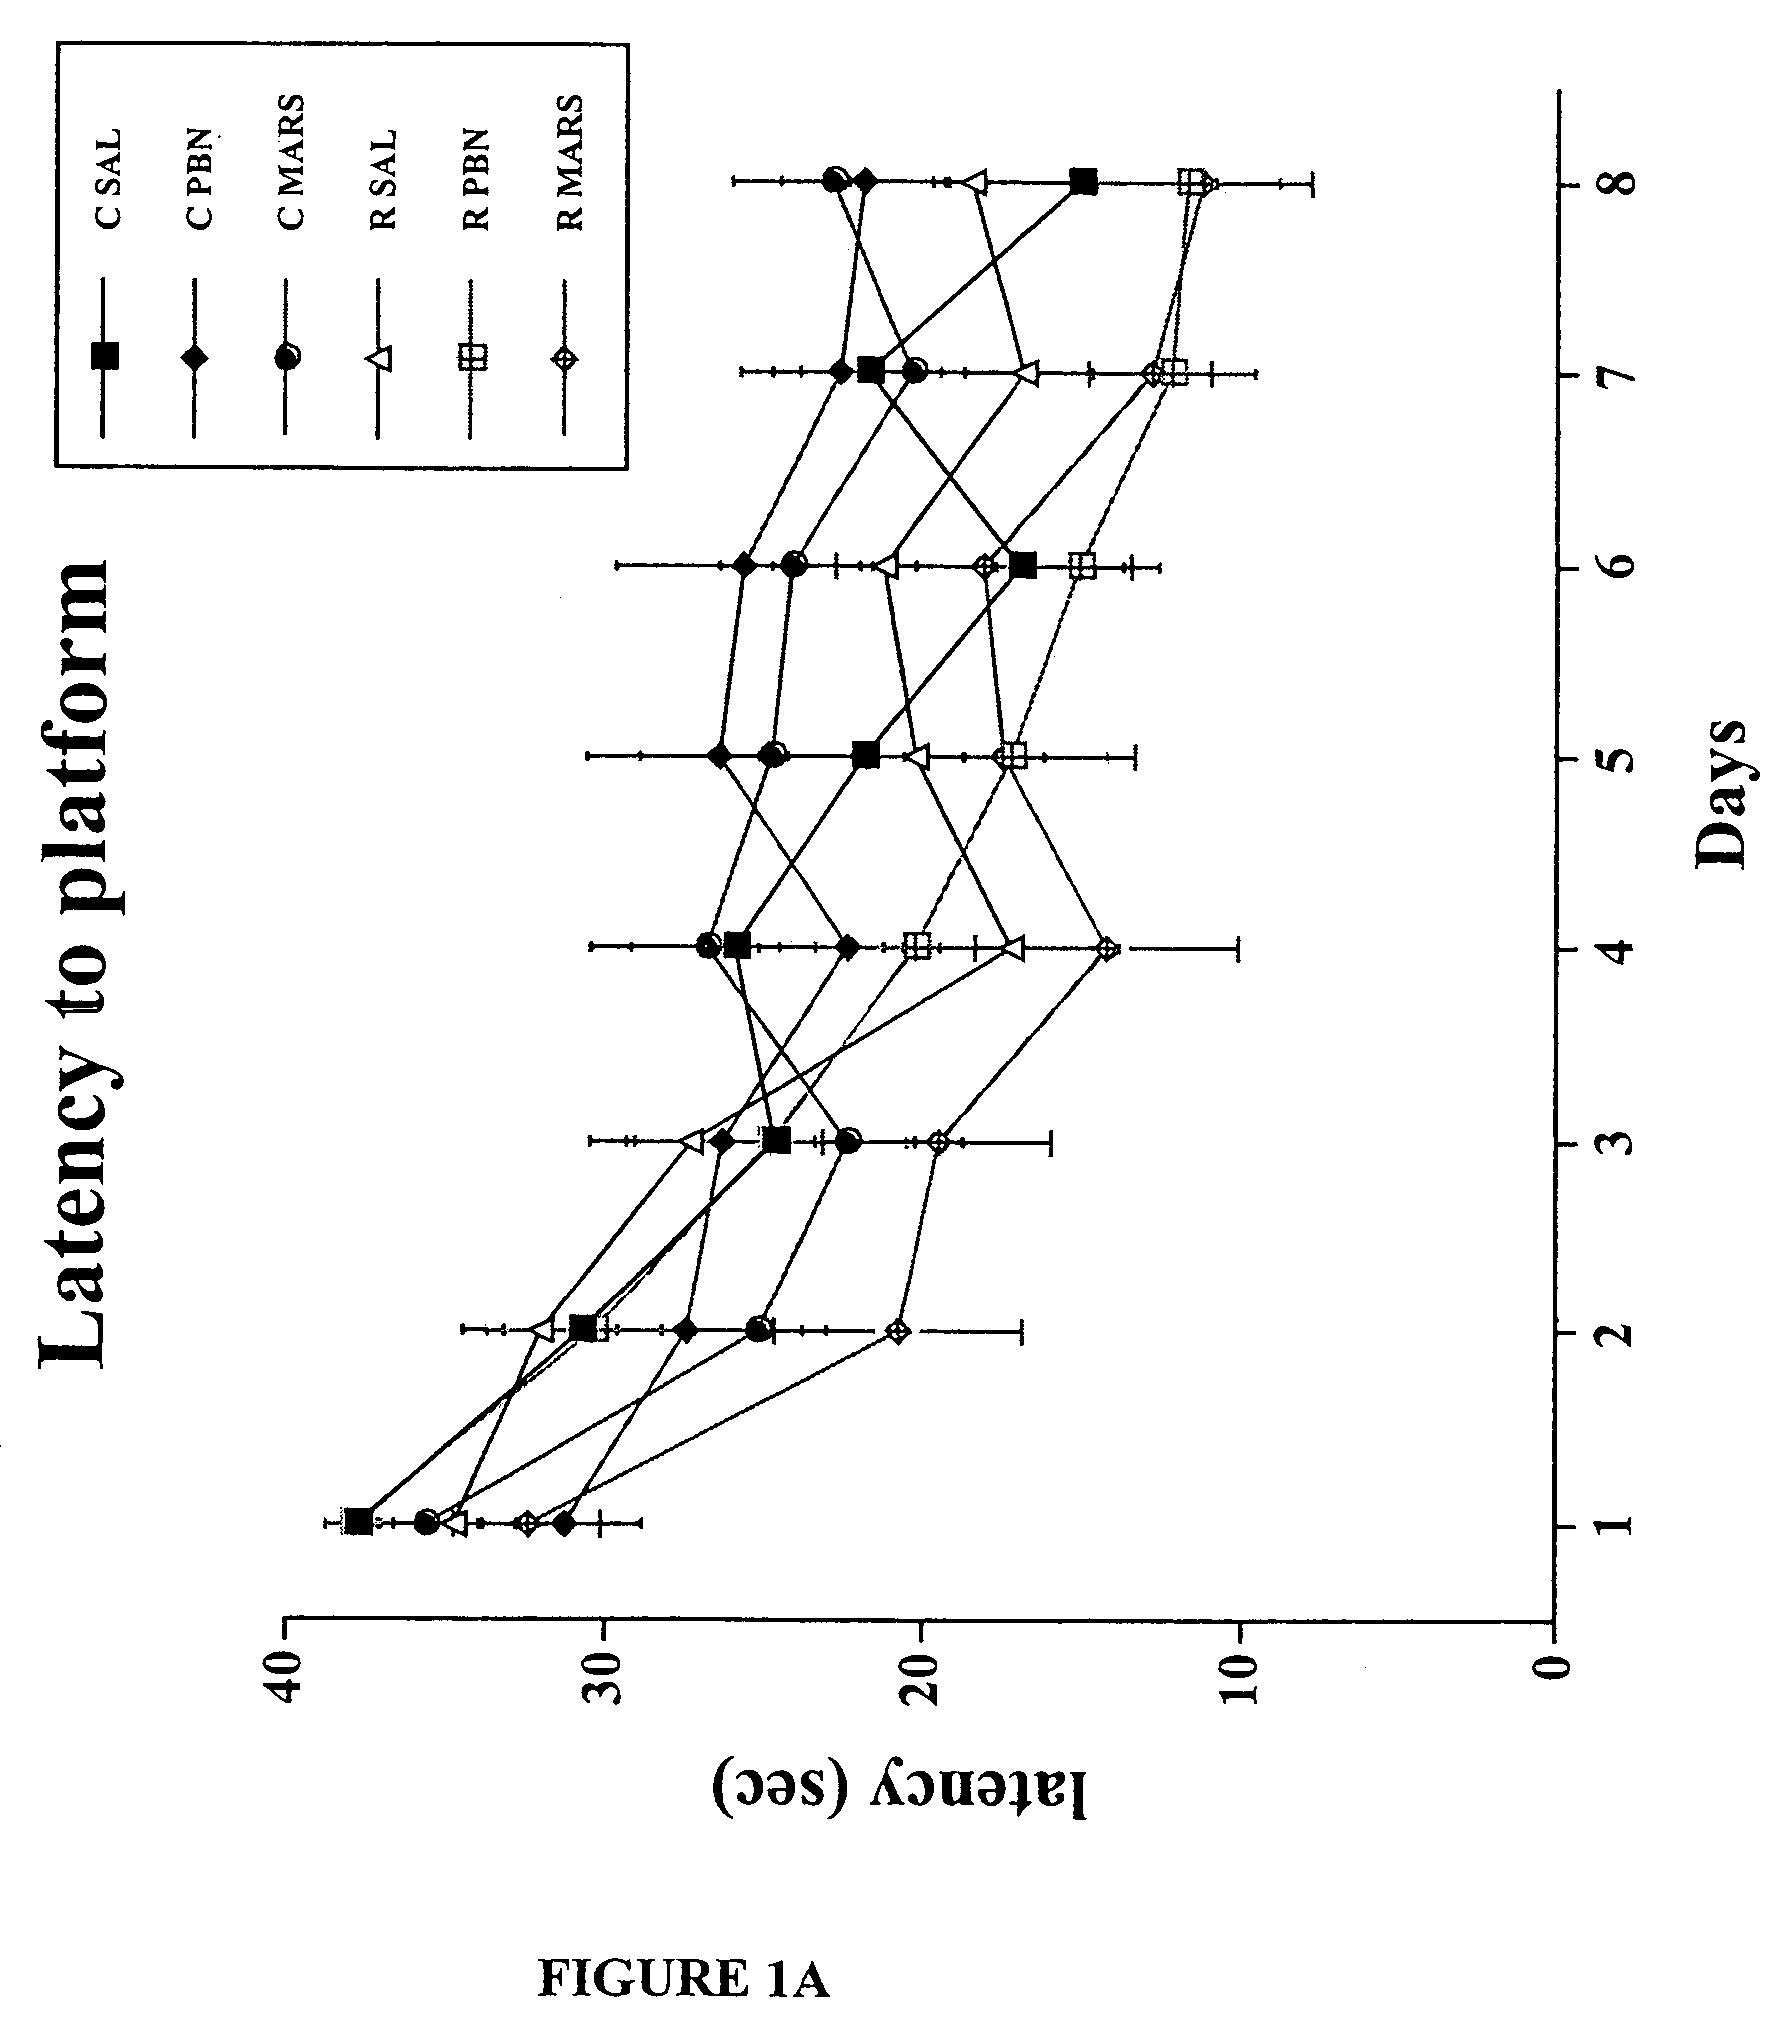 Method for increasing cognitive function and neurogenesis